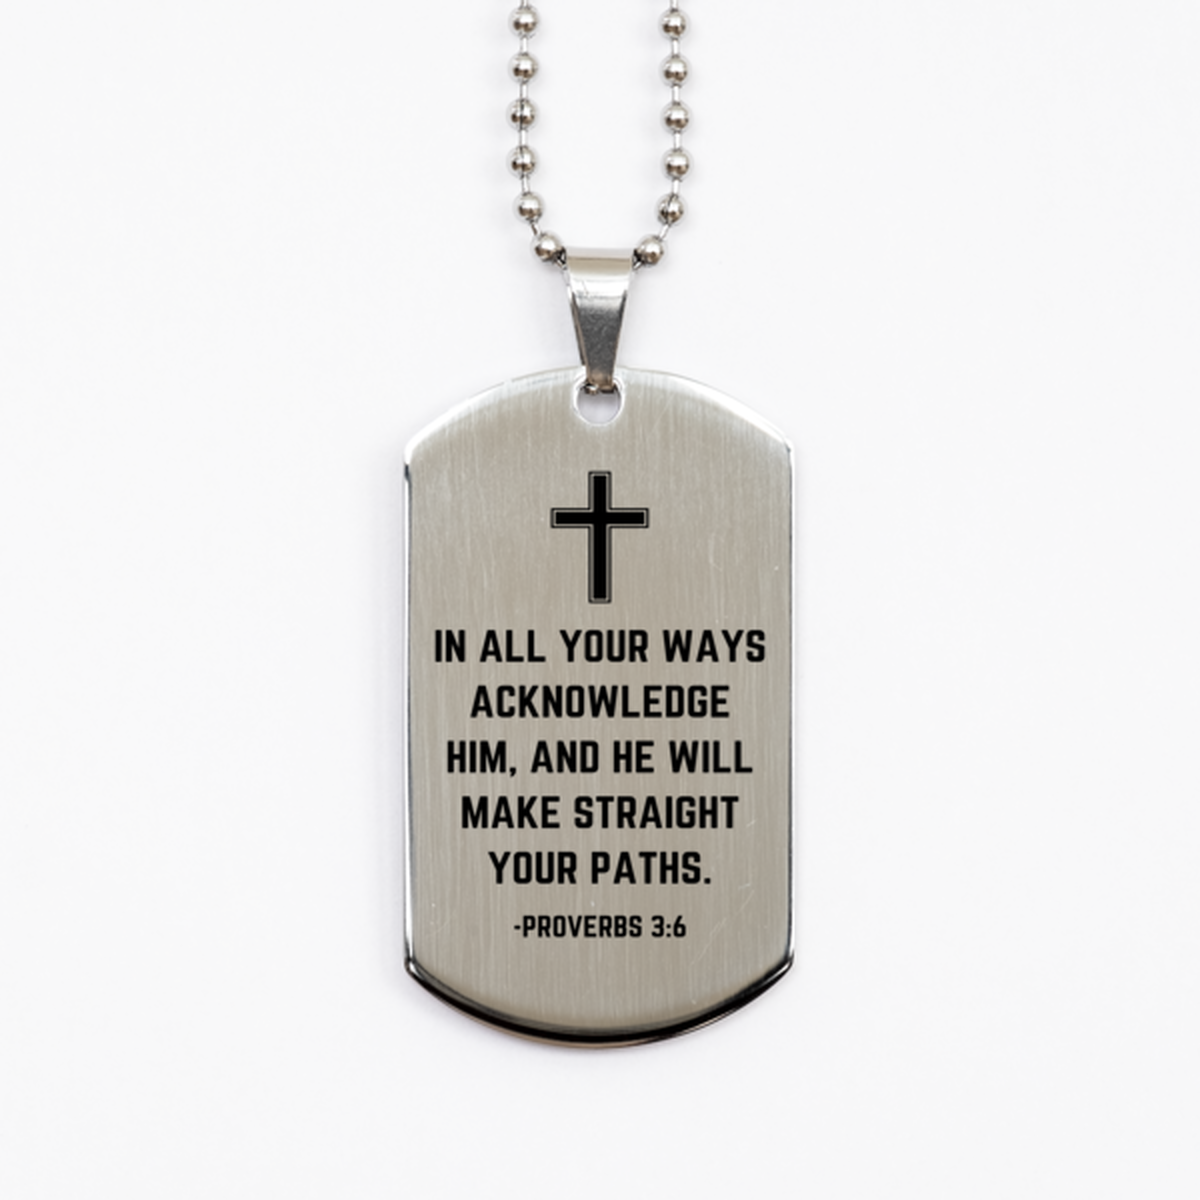 Baptism Gifts For Teenage Boys Girls, Christian Bible Verse Silver Dog Tag, In all your ways acknowledge Him, Confirmation Gifts, Bible Verse Necklace for Son, Godson, Grandson, Nephew